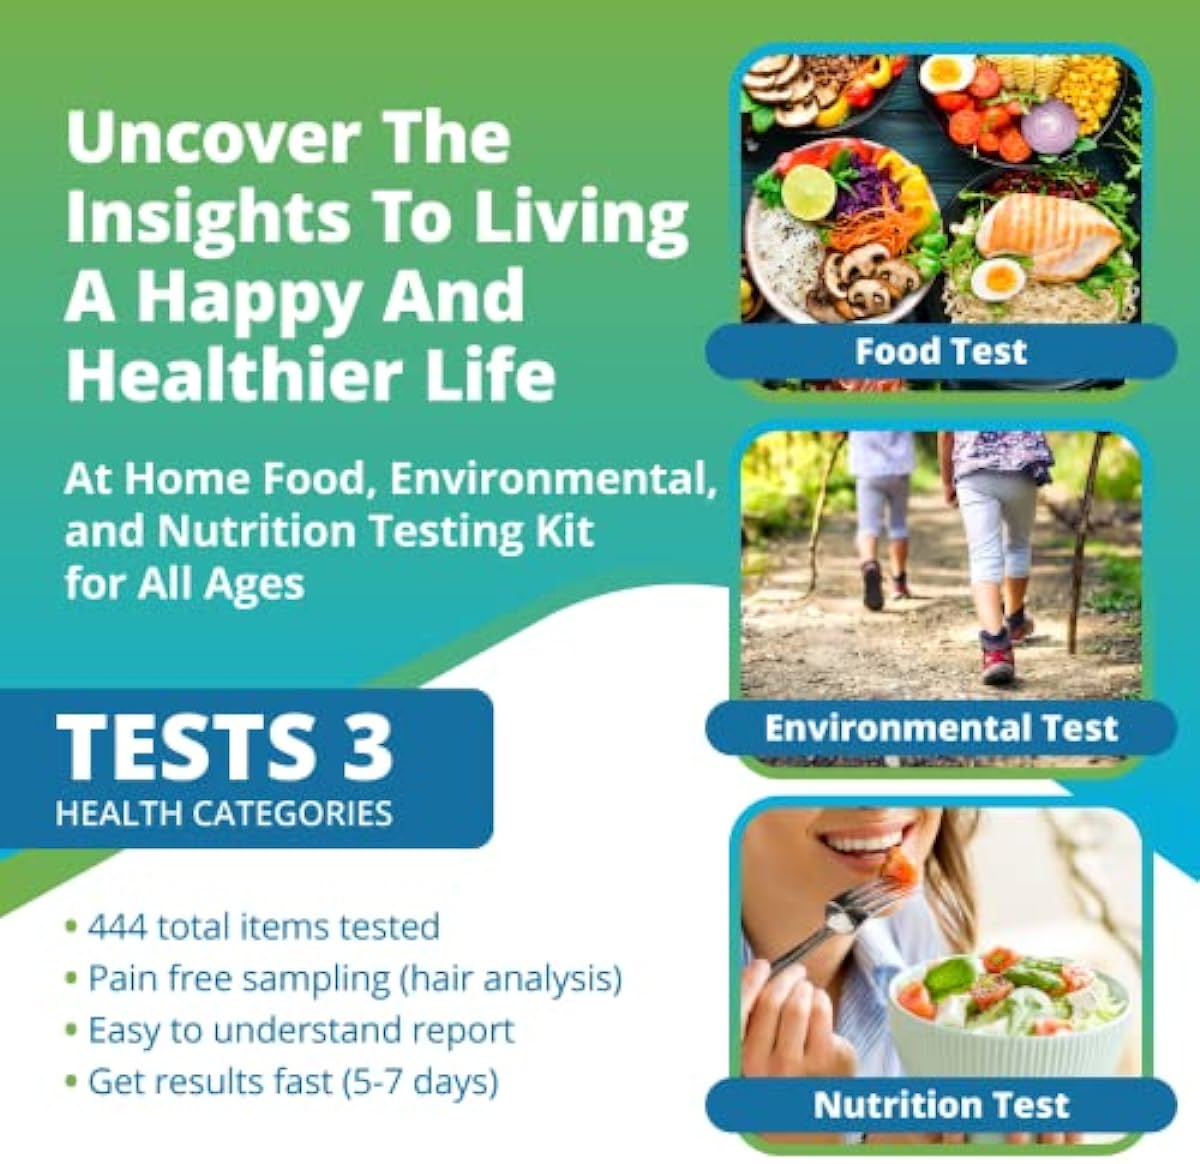 5Strands Standard Package, 444 Items Tested, Includes 3 Tests - Food Intolerance, Environment Sensitivity, Nutrition Imbalance, at Home Health Collection Kit, Accurate Test Results in 5-7 Days